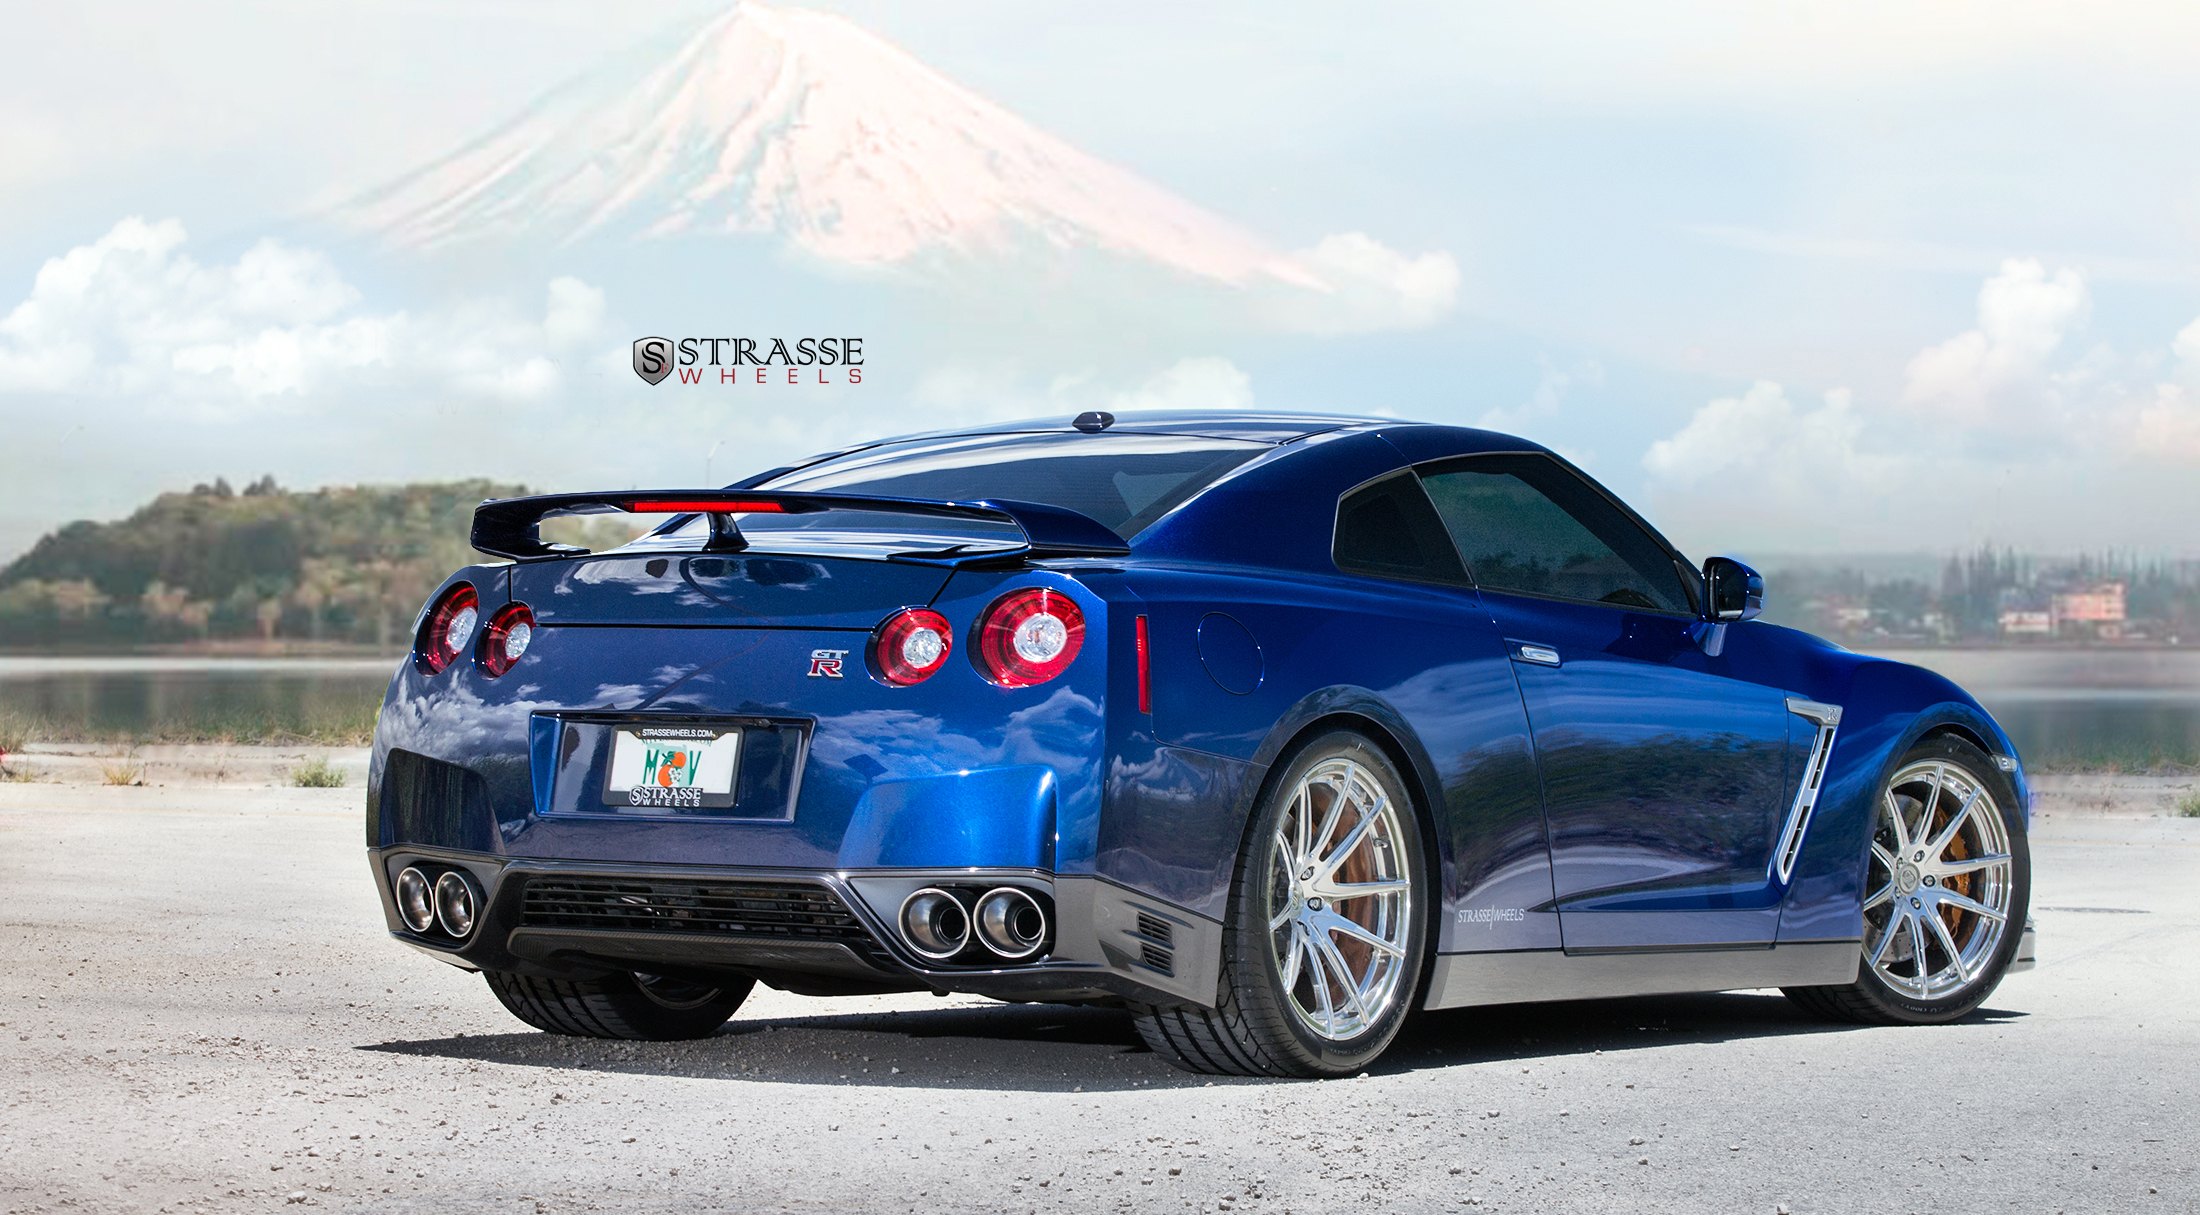 Blue Nissan GT-R with Polished Strasse Wheels - Photo by Strasse Forged